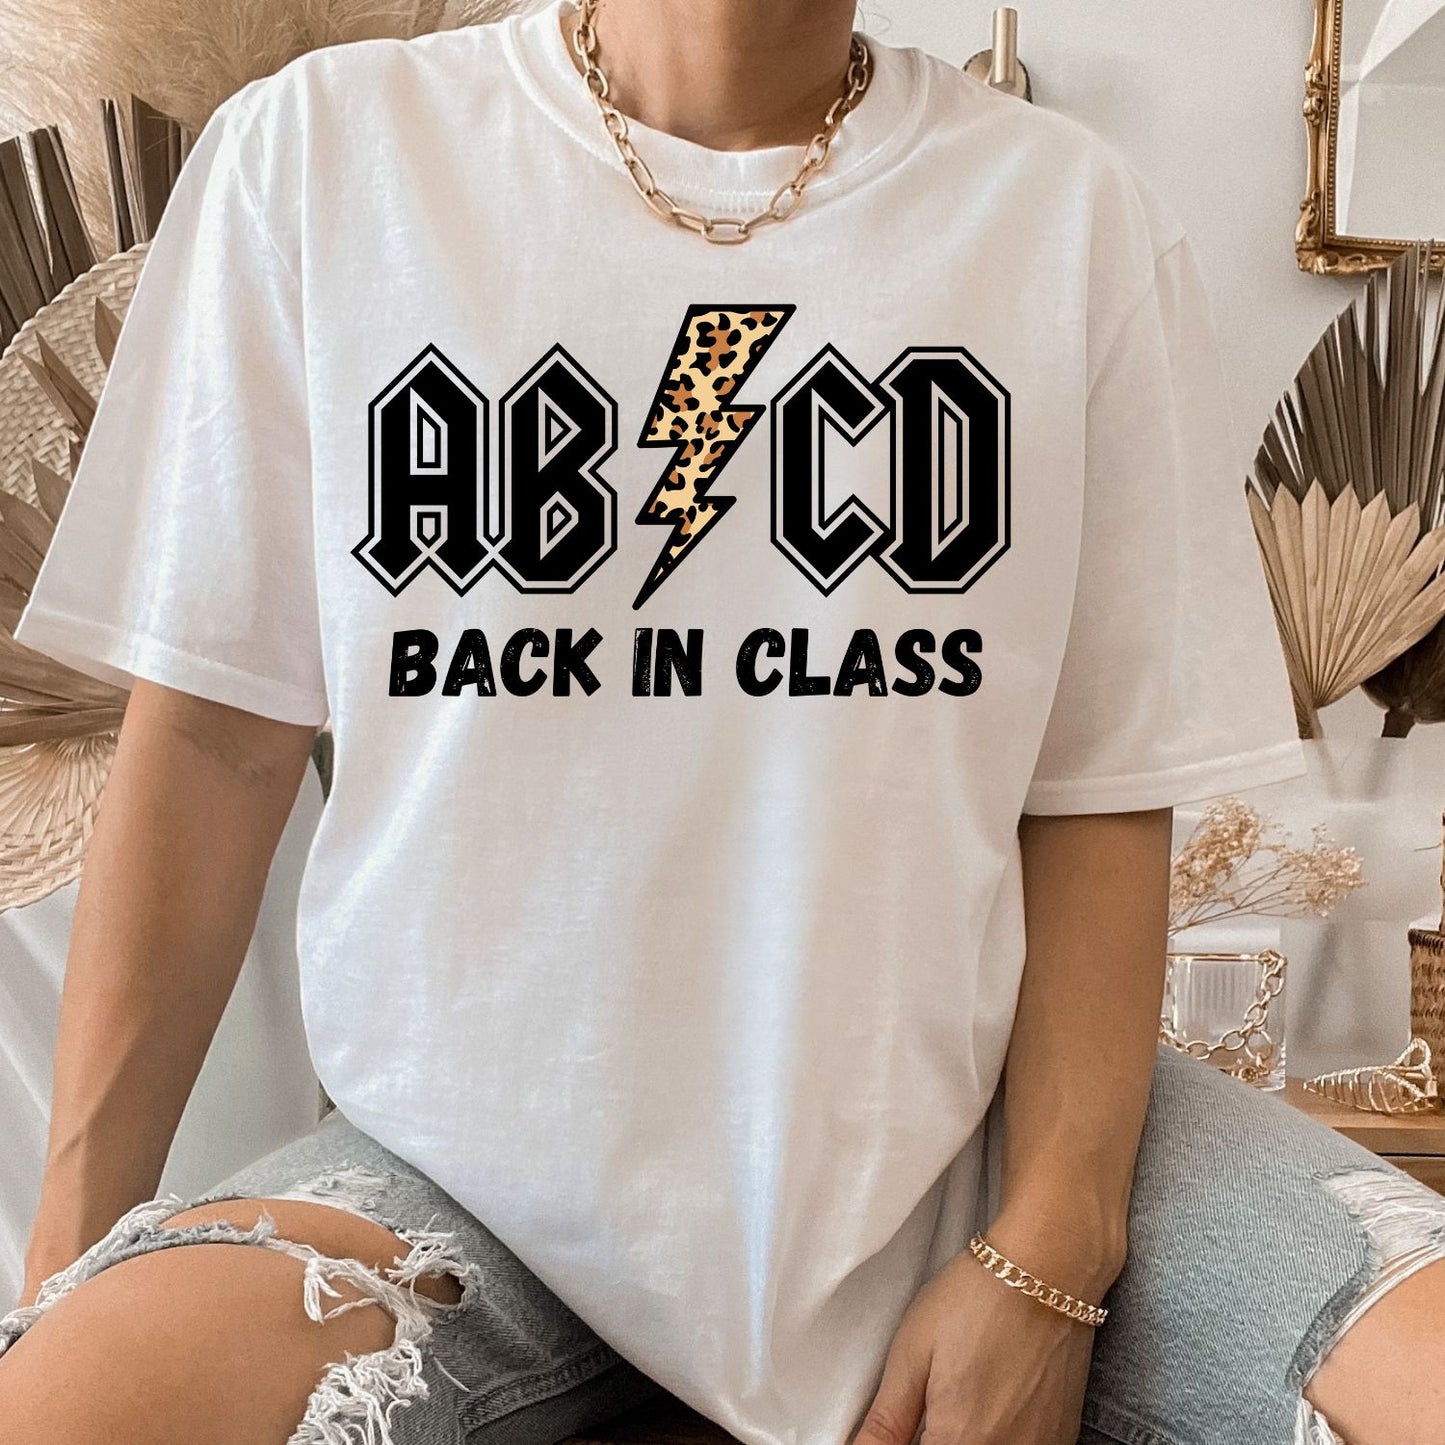 ABCD - Back to School